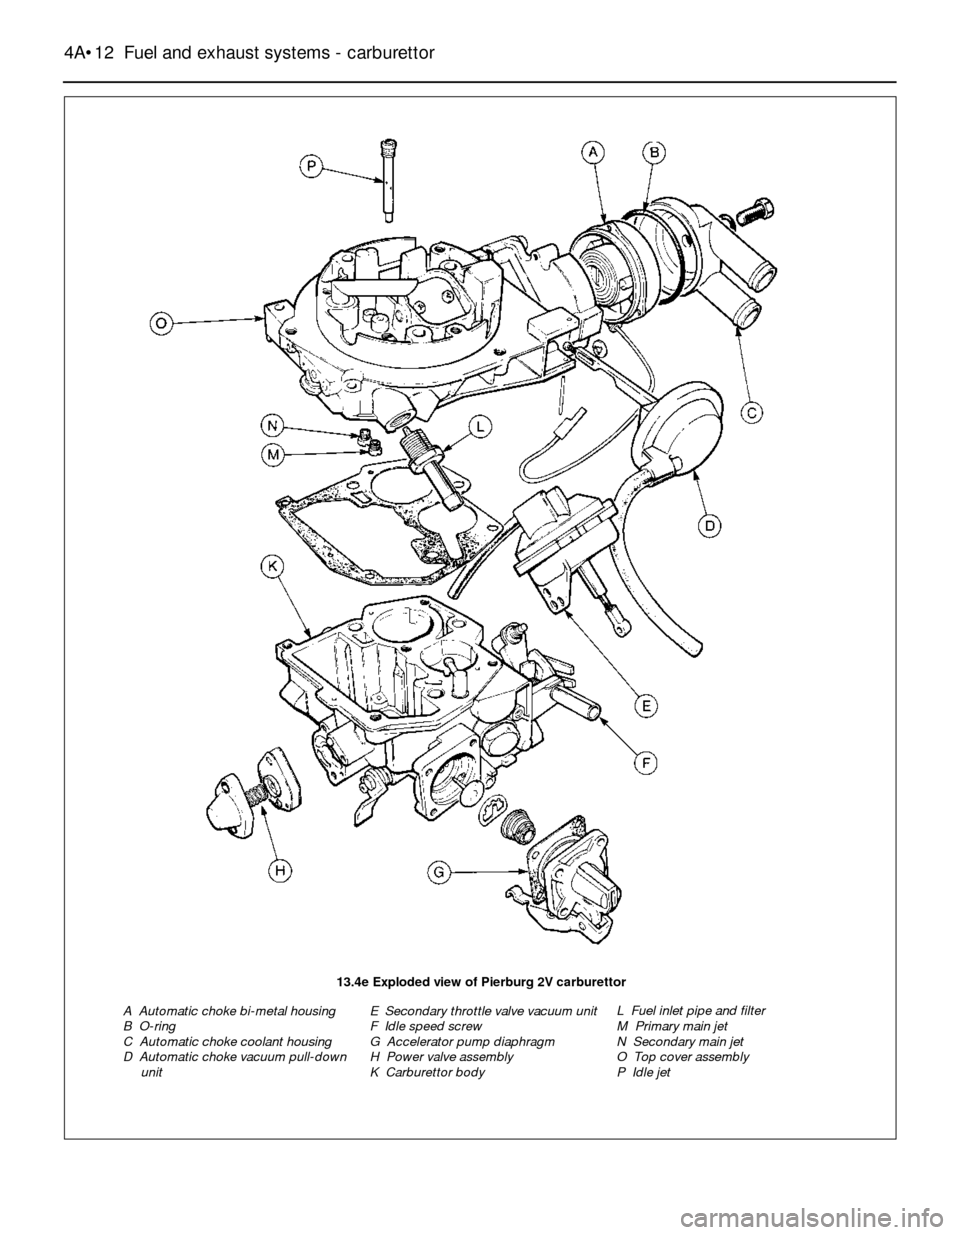 FORD SIERRA 1988 2.G Fuel And Exhaust Systems Carburettor User Guide 4A•12Fuel and exhaust systems - carburettor
13.4e Exploded view of Pierburg 2V carburettor
A  Automatic choke bi-metal housing
B  O-ring
C  Automatic choke coolant housing
D  Automatic choke vacuum 